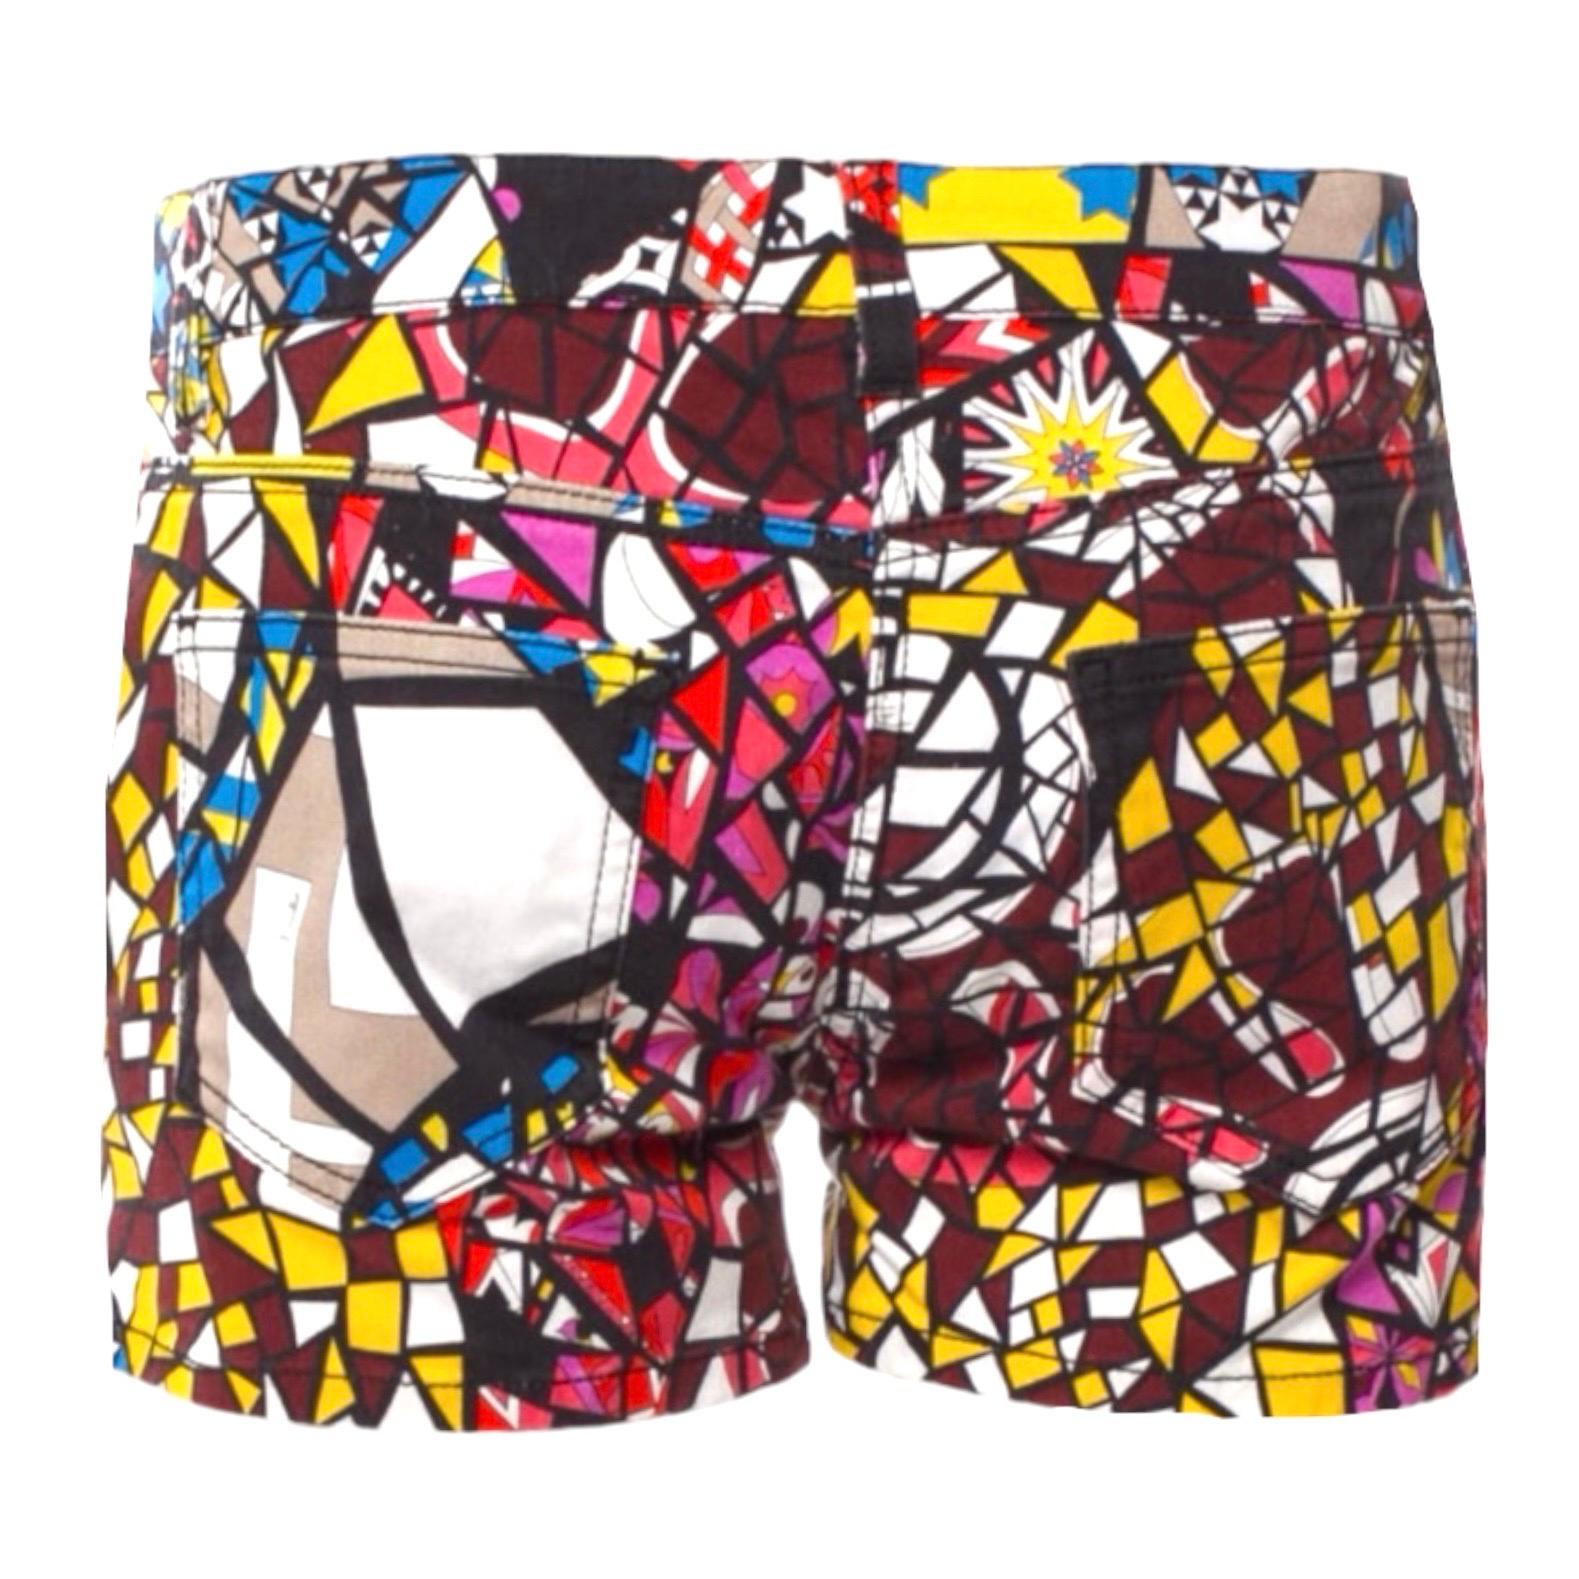 A stunning shorts by Emilio Pucci
This shorts feature the Pucci signature print
So versatile - matches with many colors
